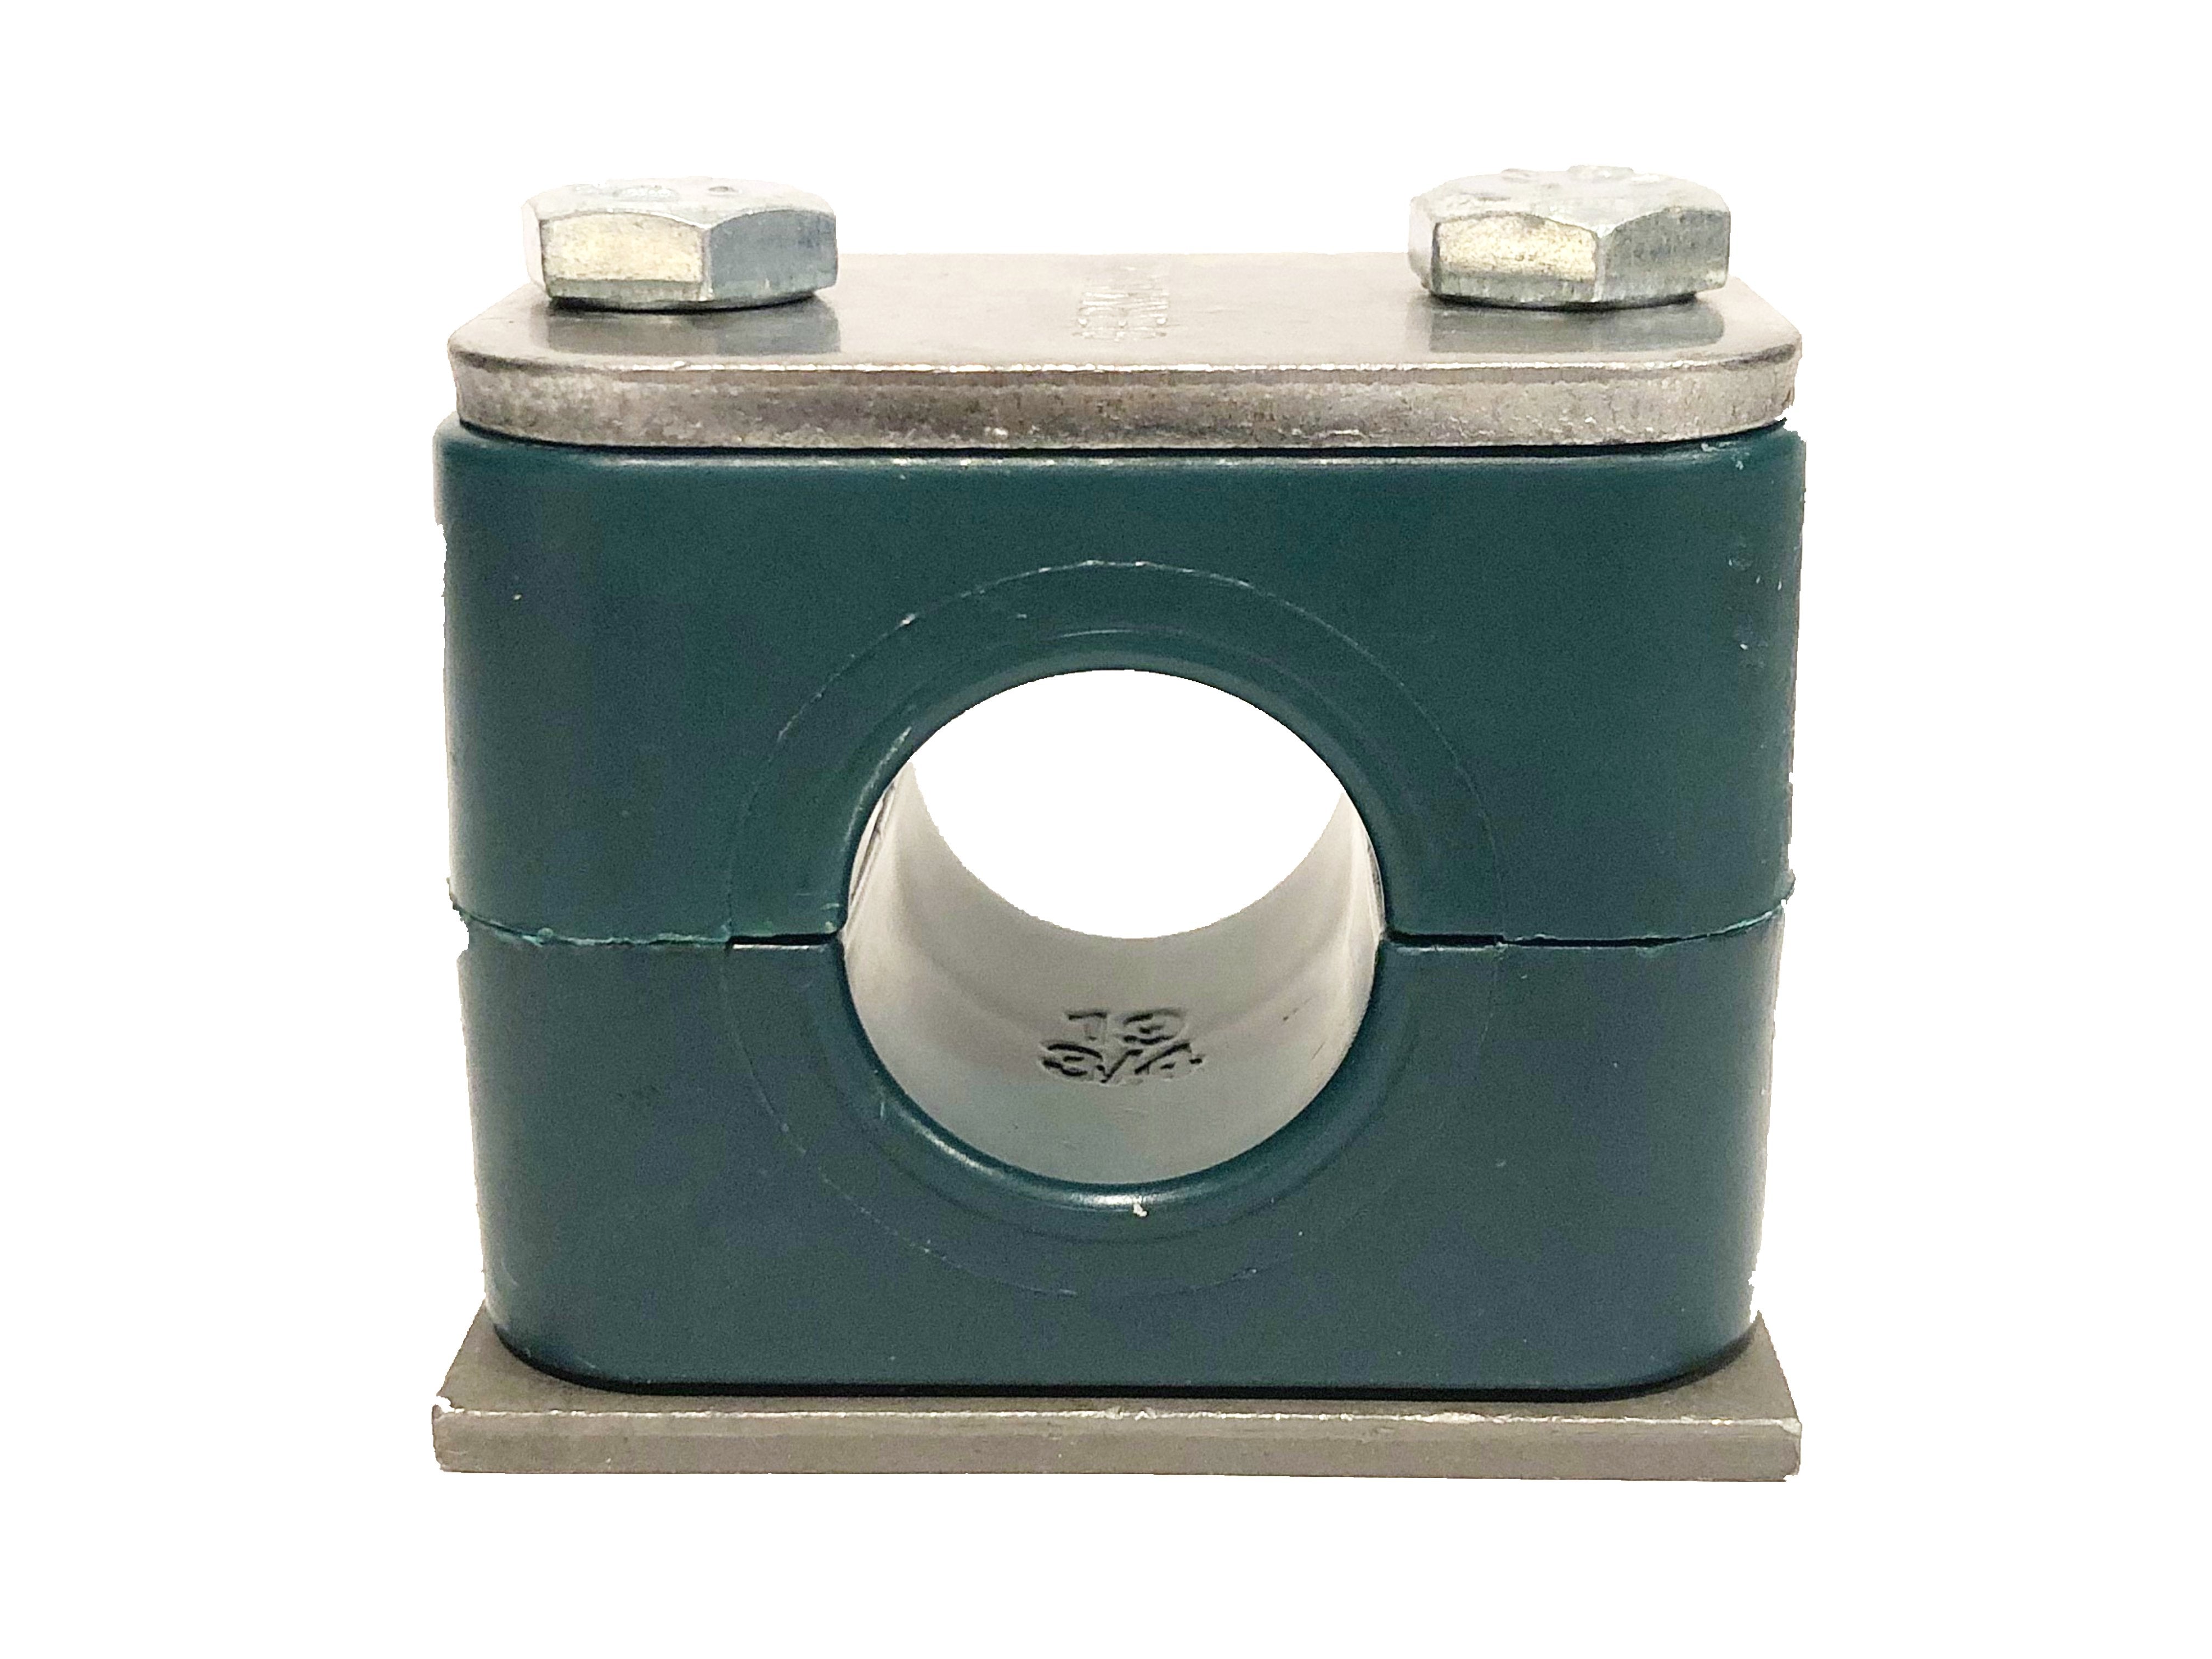 SP-426.9-PP-H-DP-AS-U-W10 : Stauff Clamp, Single Weld Plate, 1.06" (26.9mm) OD, for 3/4" Pipe, Green PP Insert, Smooth Interior, Carbon Steel